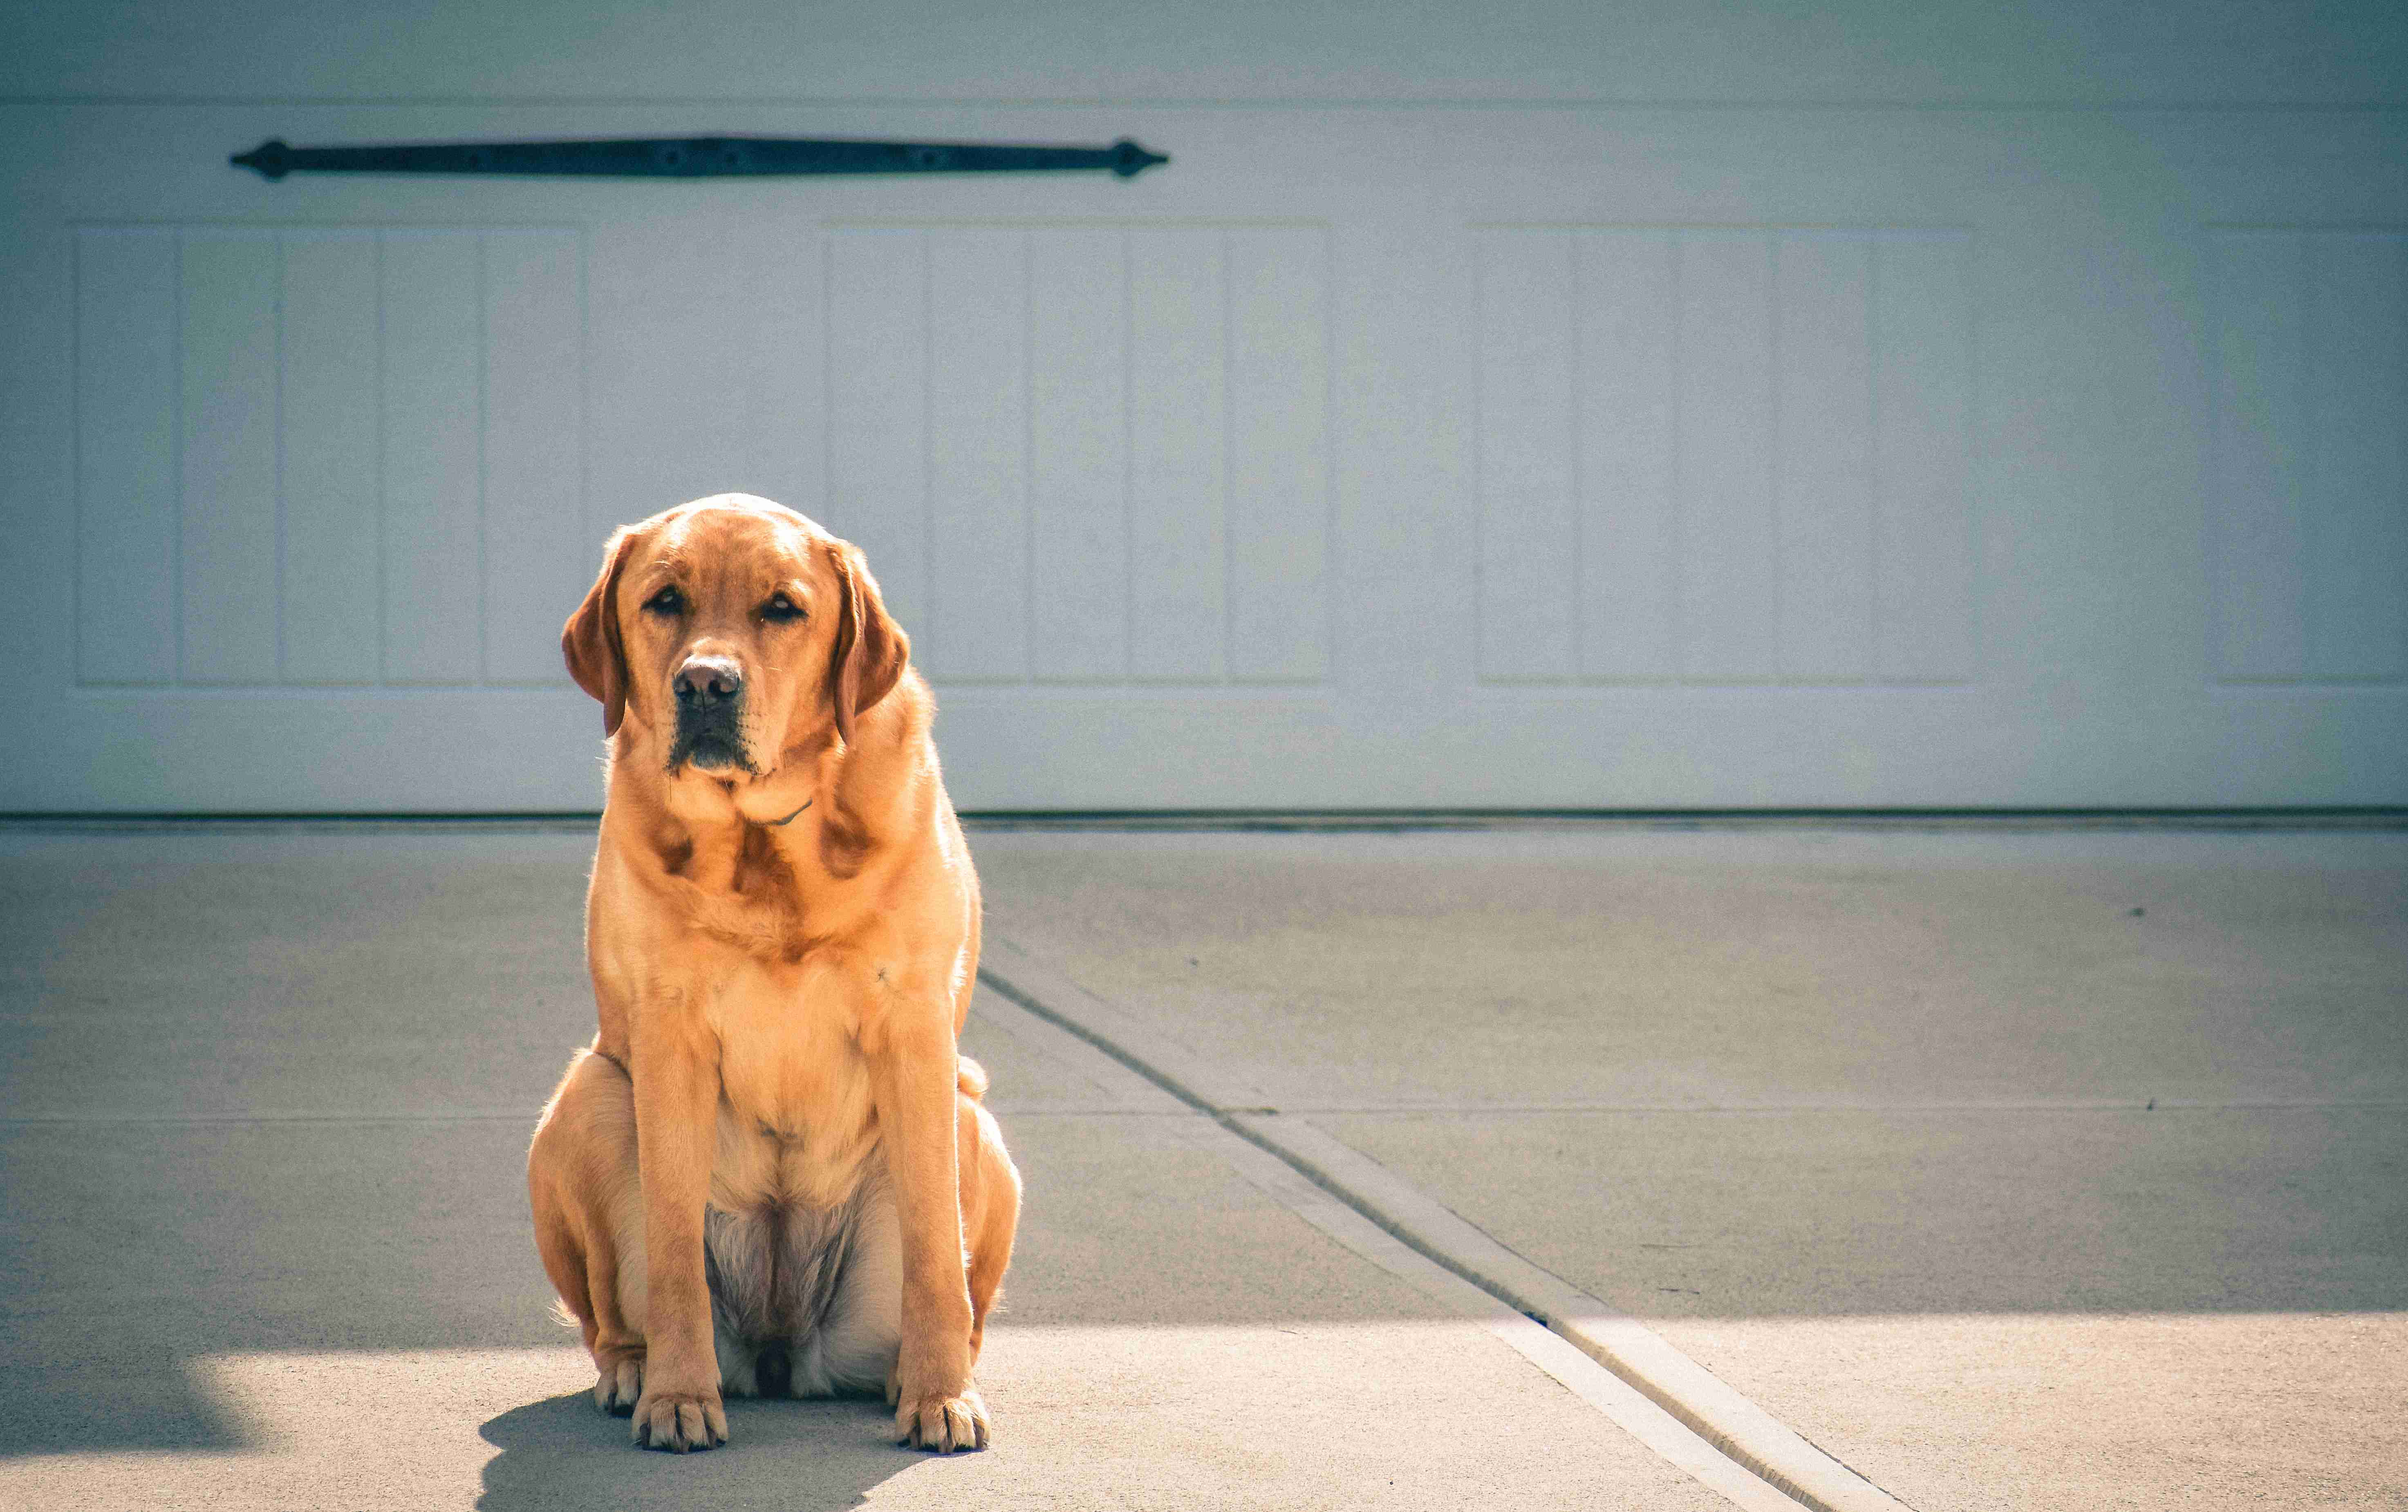 Top Signs Your Labrador Retriever is Not Digesting Food Well: What to Look Out For